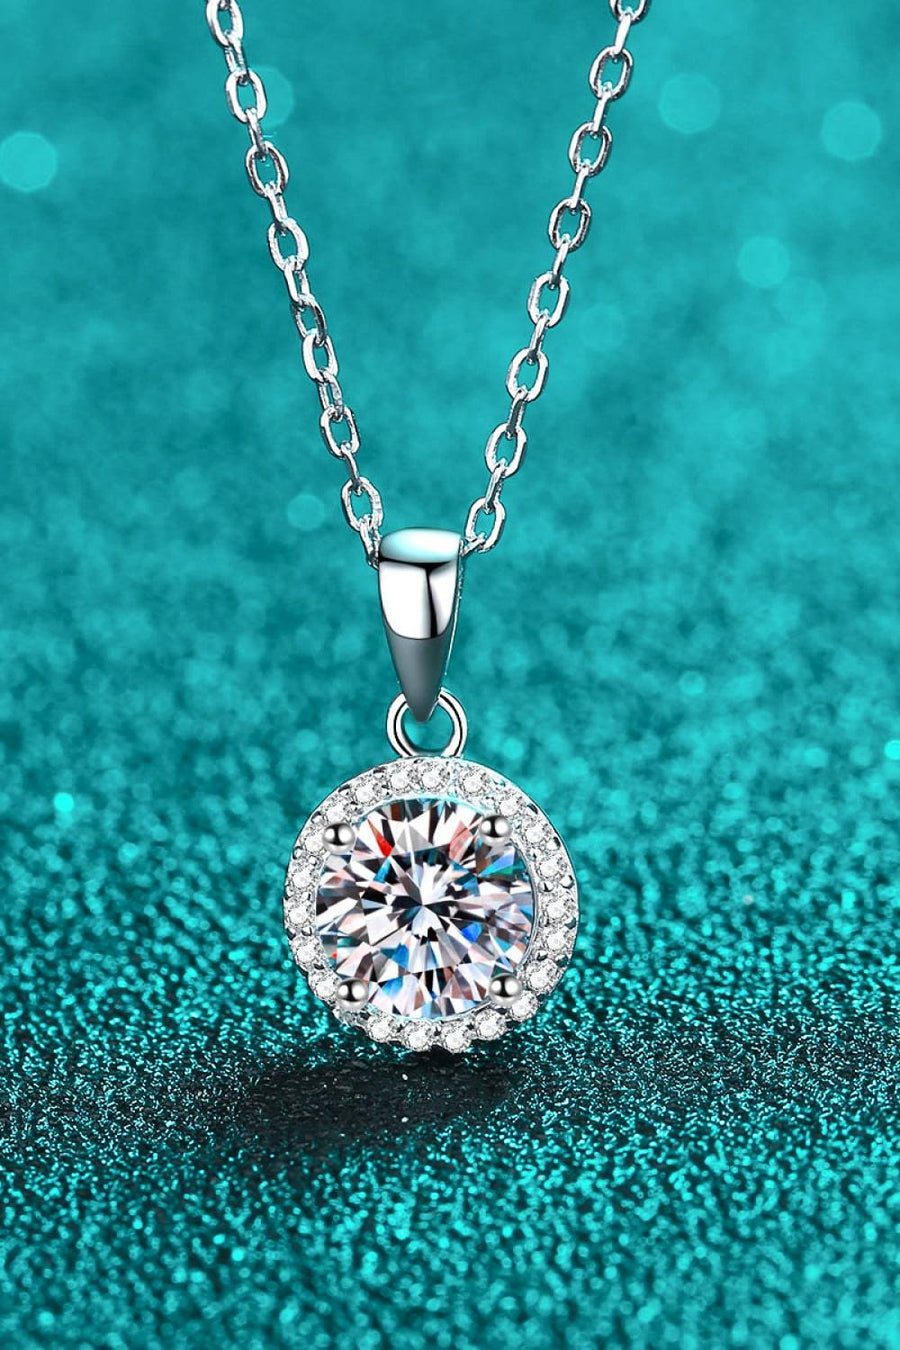 Chance to Charm 1 Carat Moissanite Round Pendant Chain Necklace - Trendha